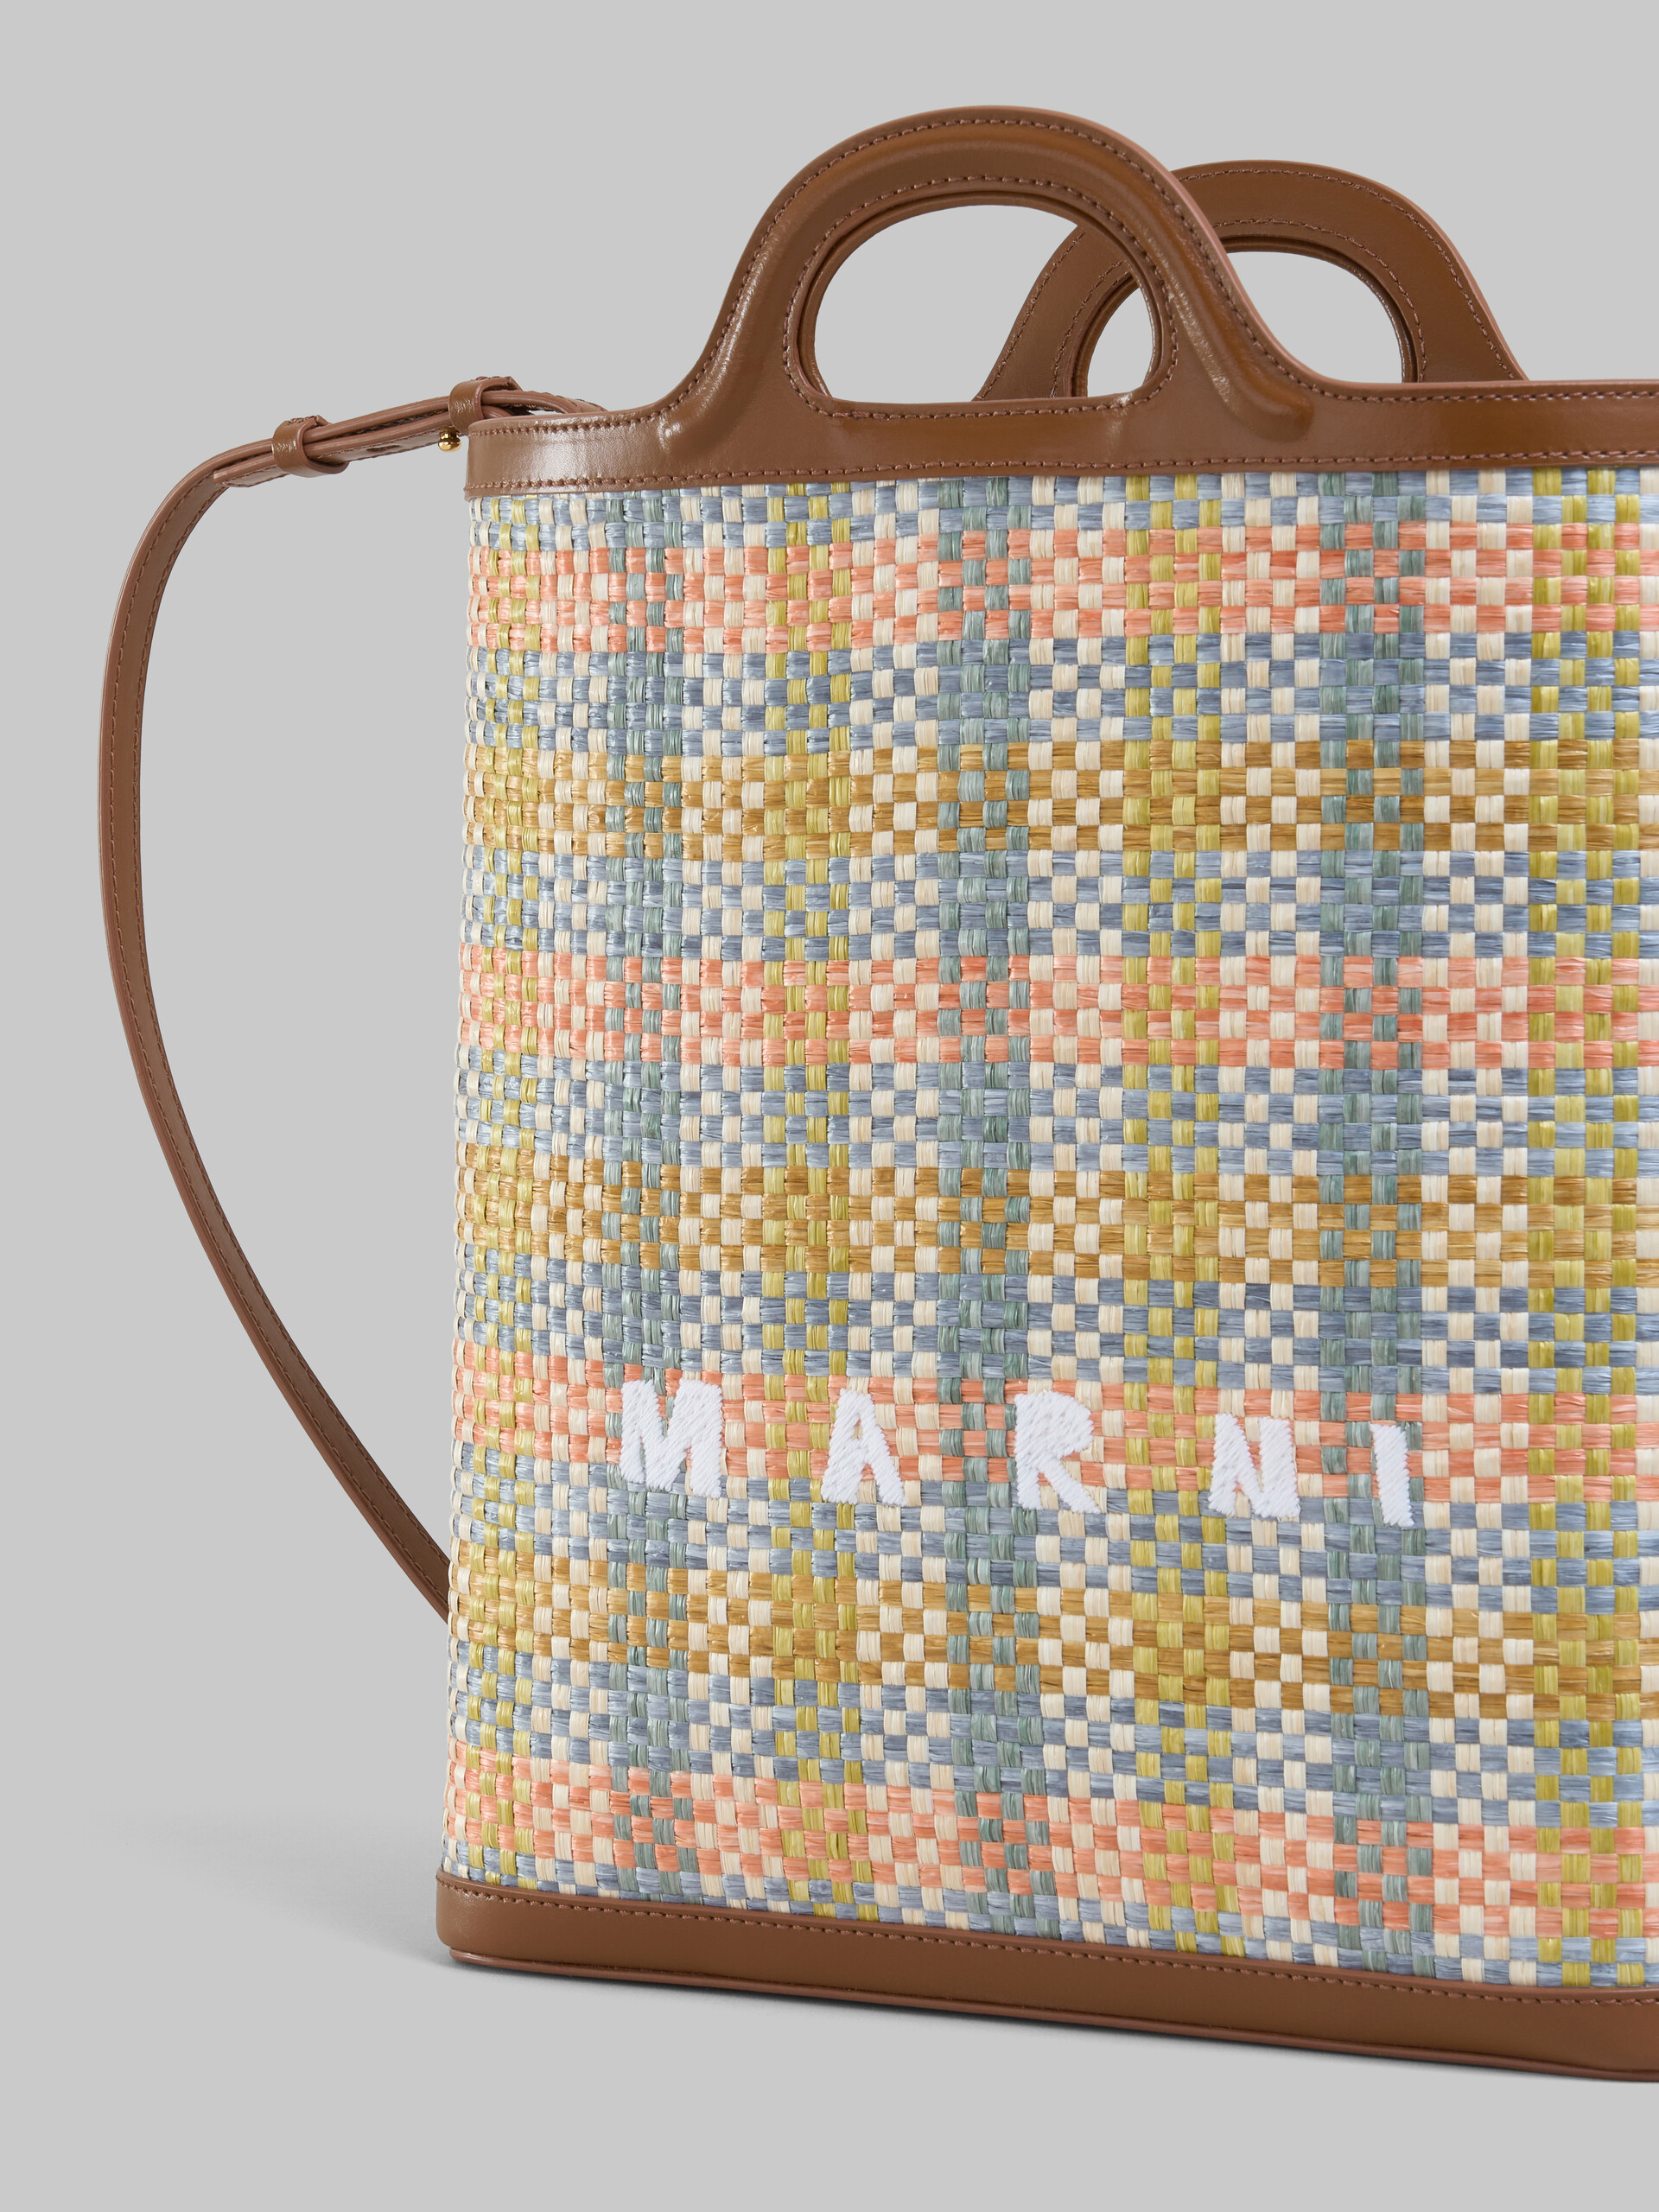 Tropicalia crossbody bag in brown leather and checked raffia-effect fabric - Shoulder Bags - Image 5